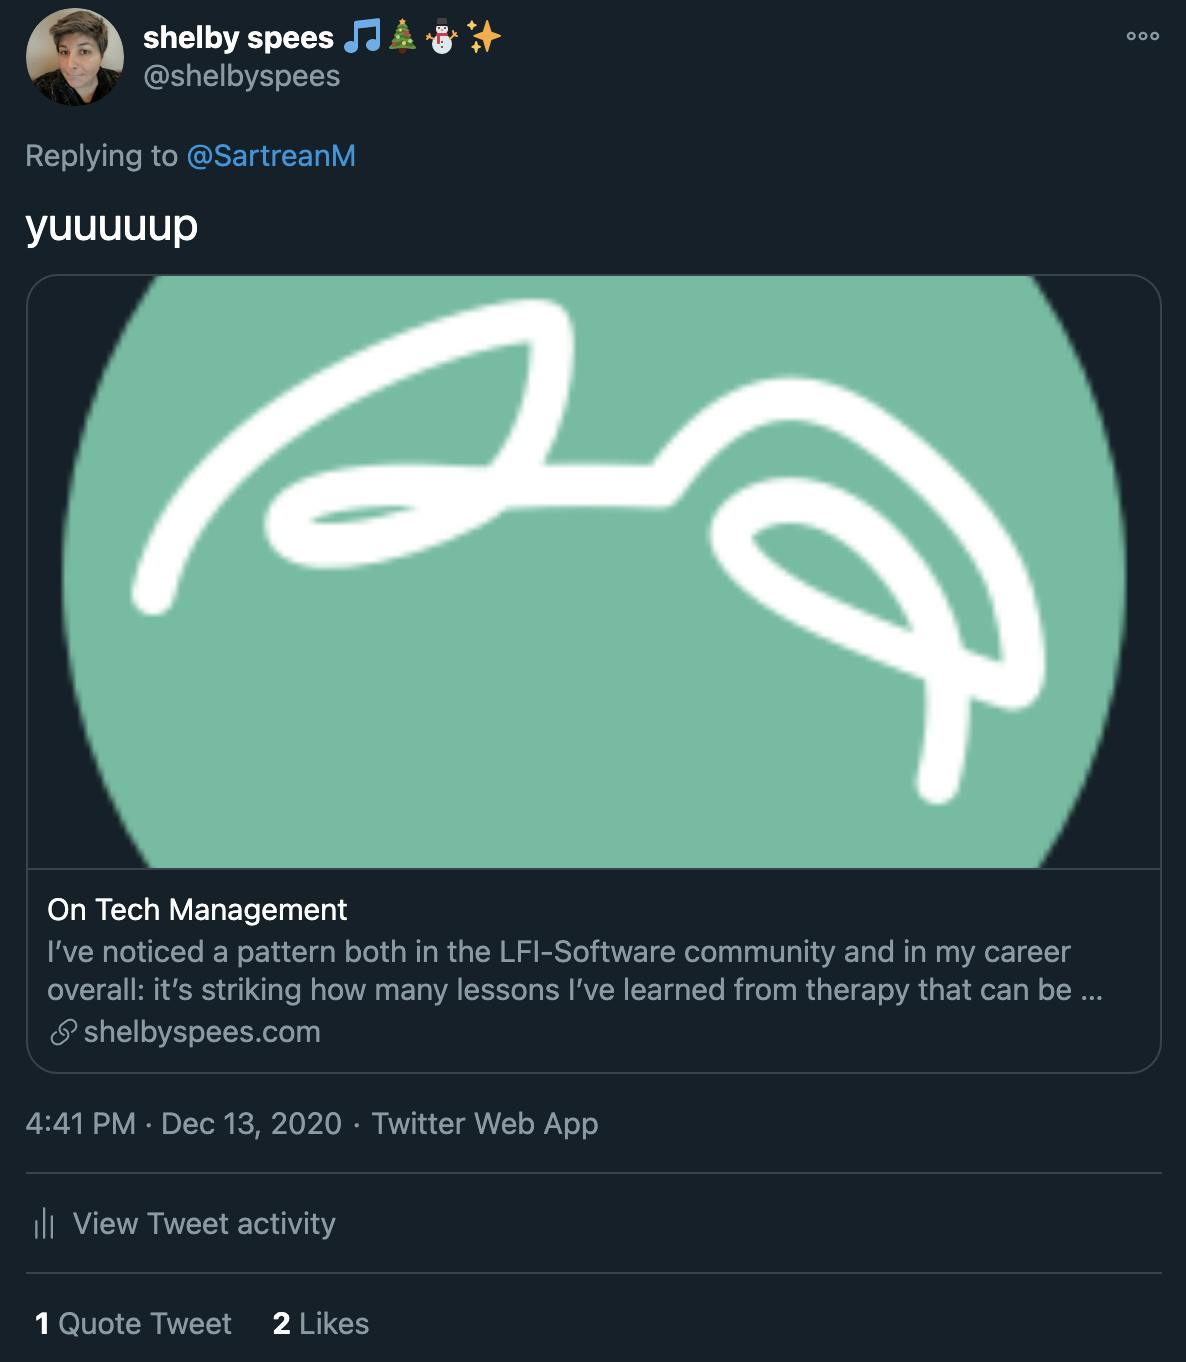 Screenshot of a tweet from Shelby that says “Yuuuup” and links to her blog post “On Tech Management.” The image displayed in the Twitter card is an awkwardly-cropped version of Shelby’s Nova ears logo from her website.